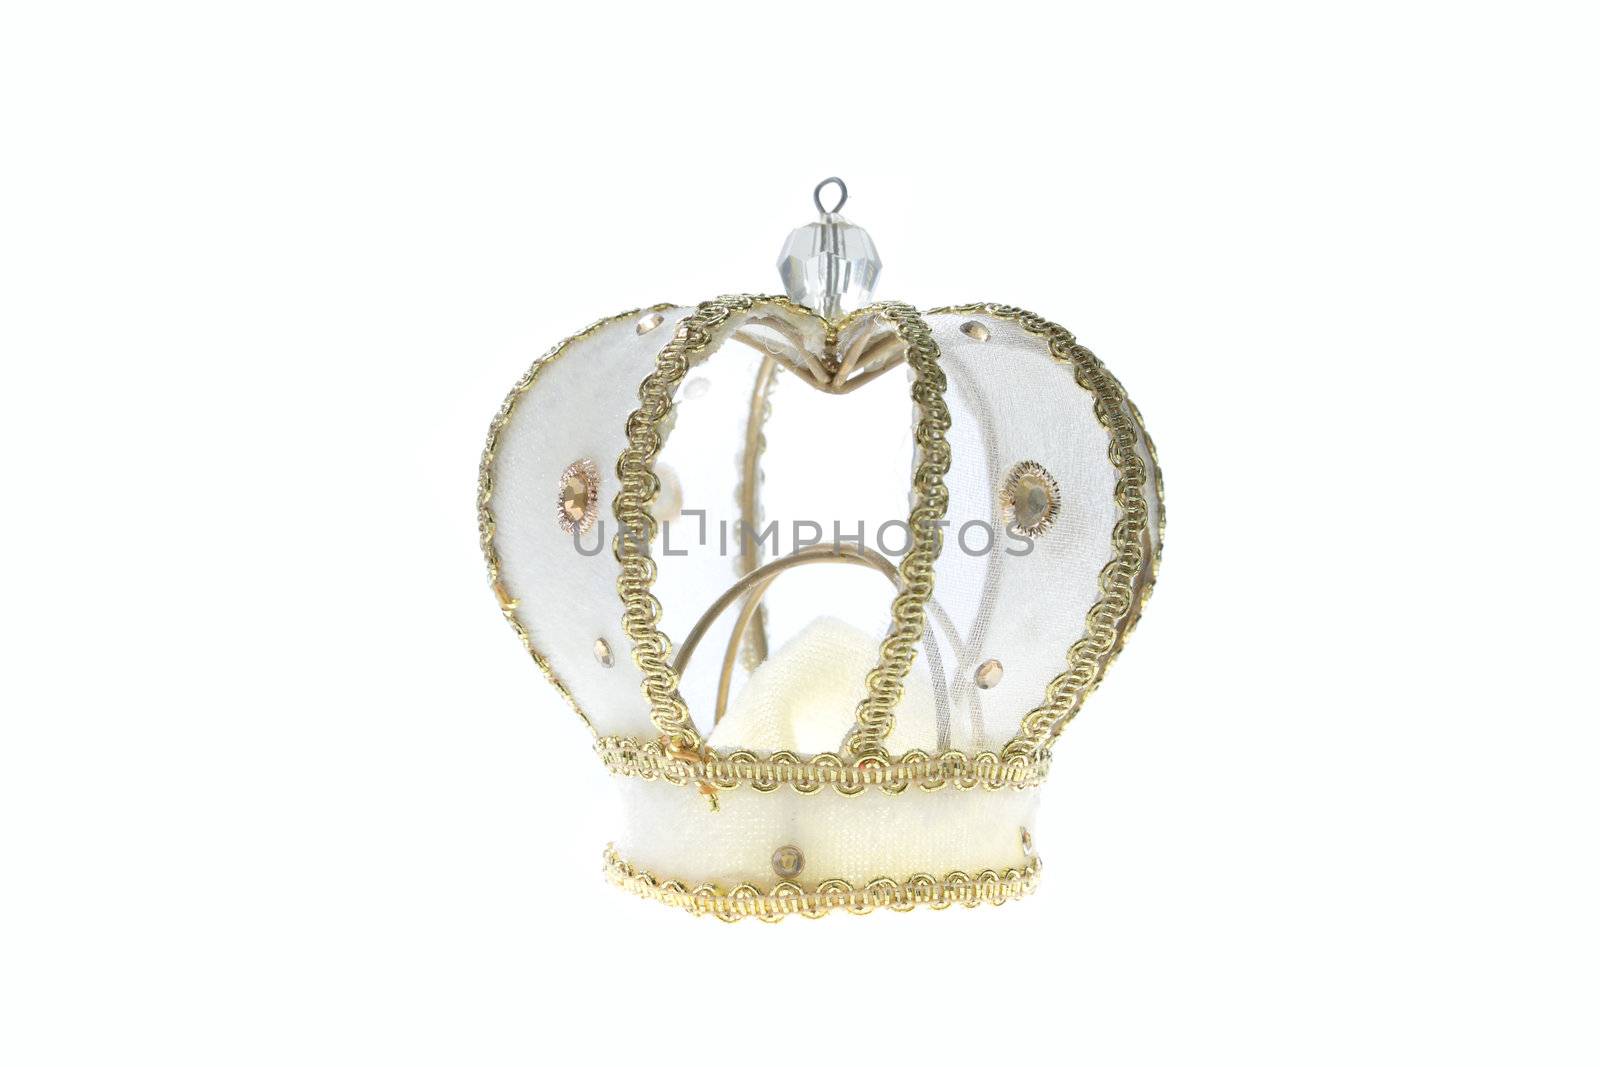 Golden crown with clipping path